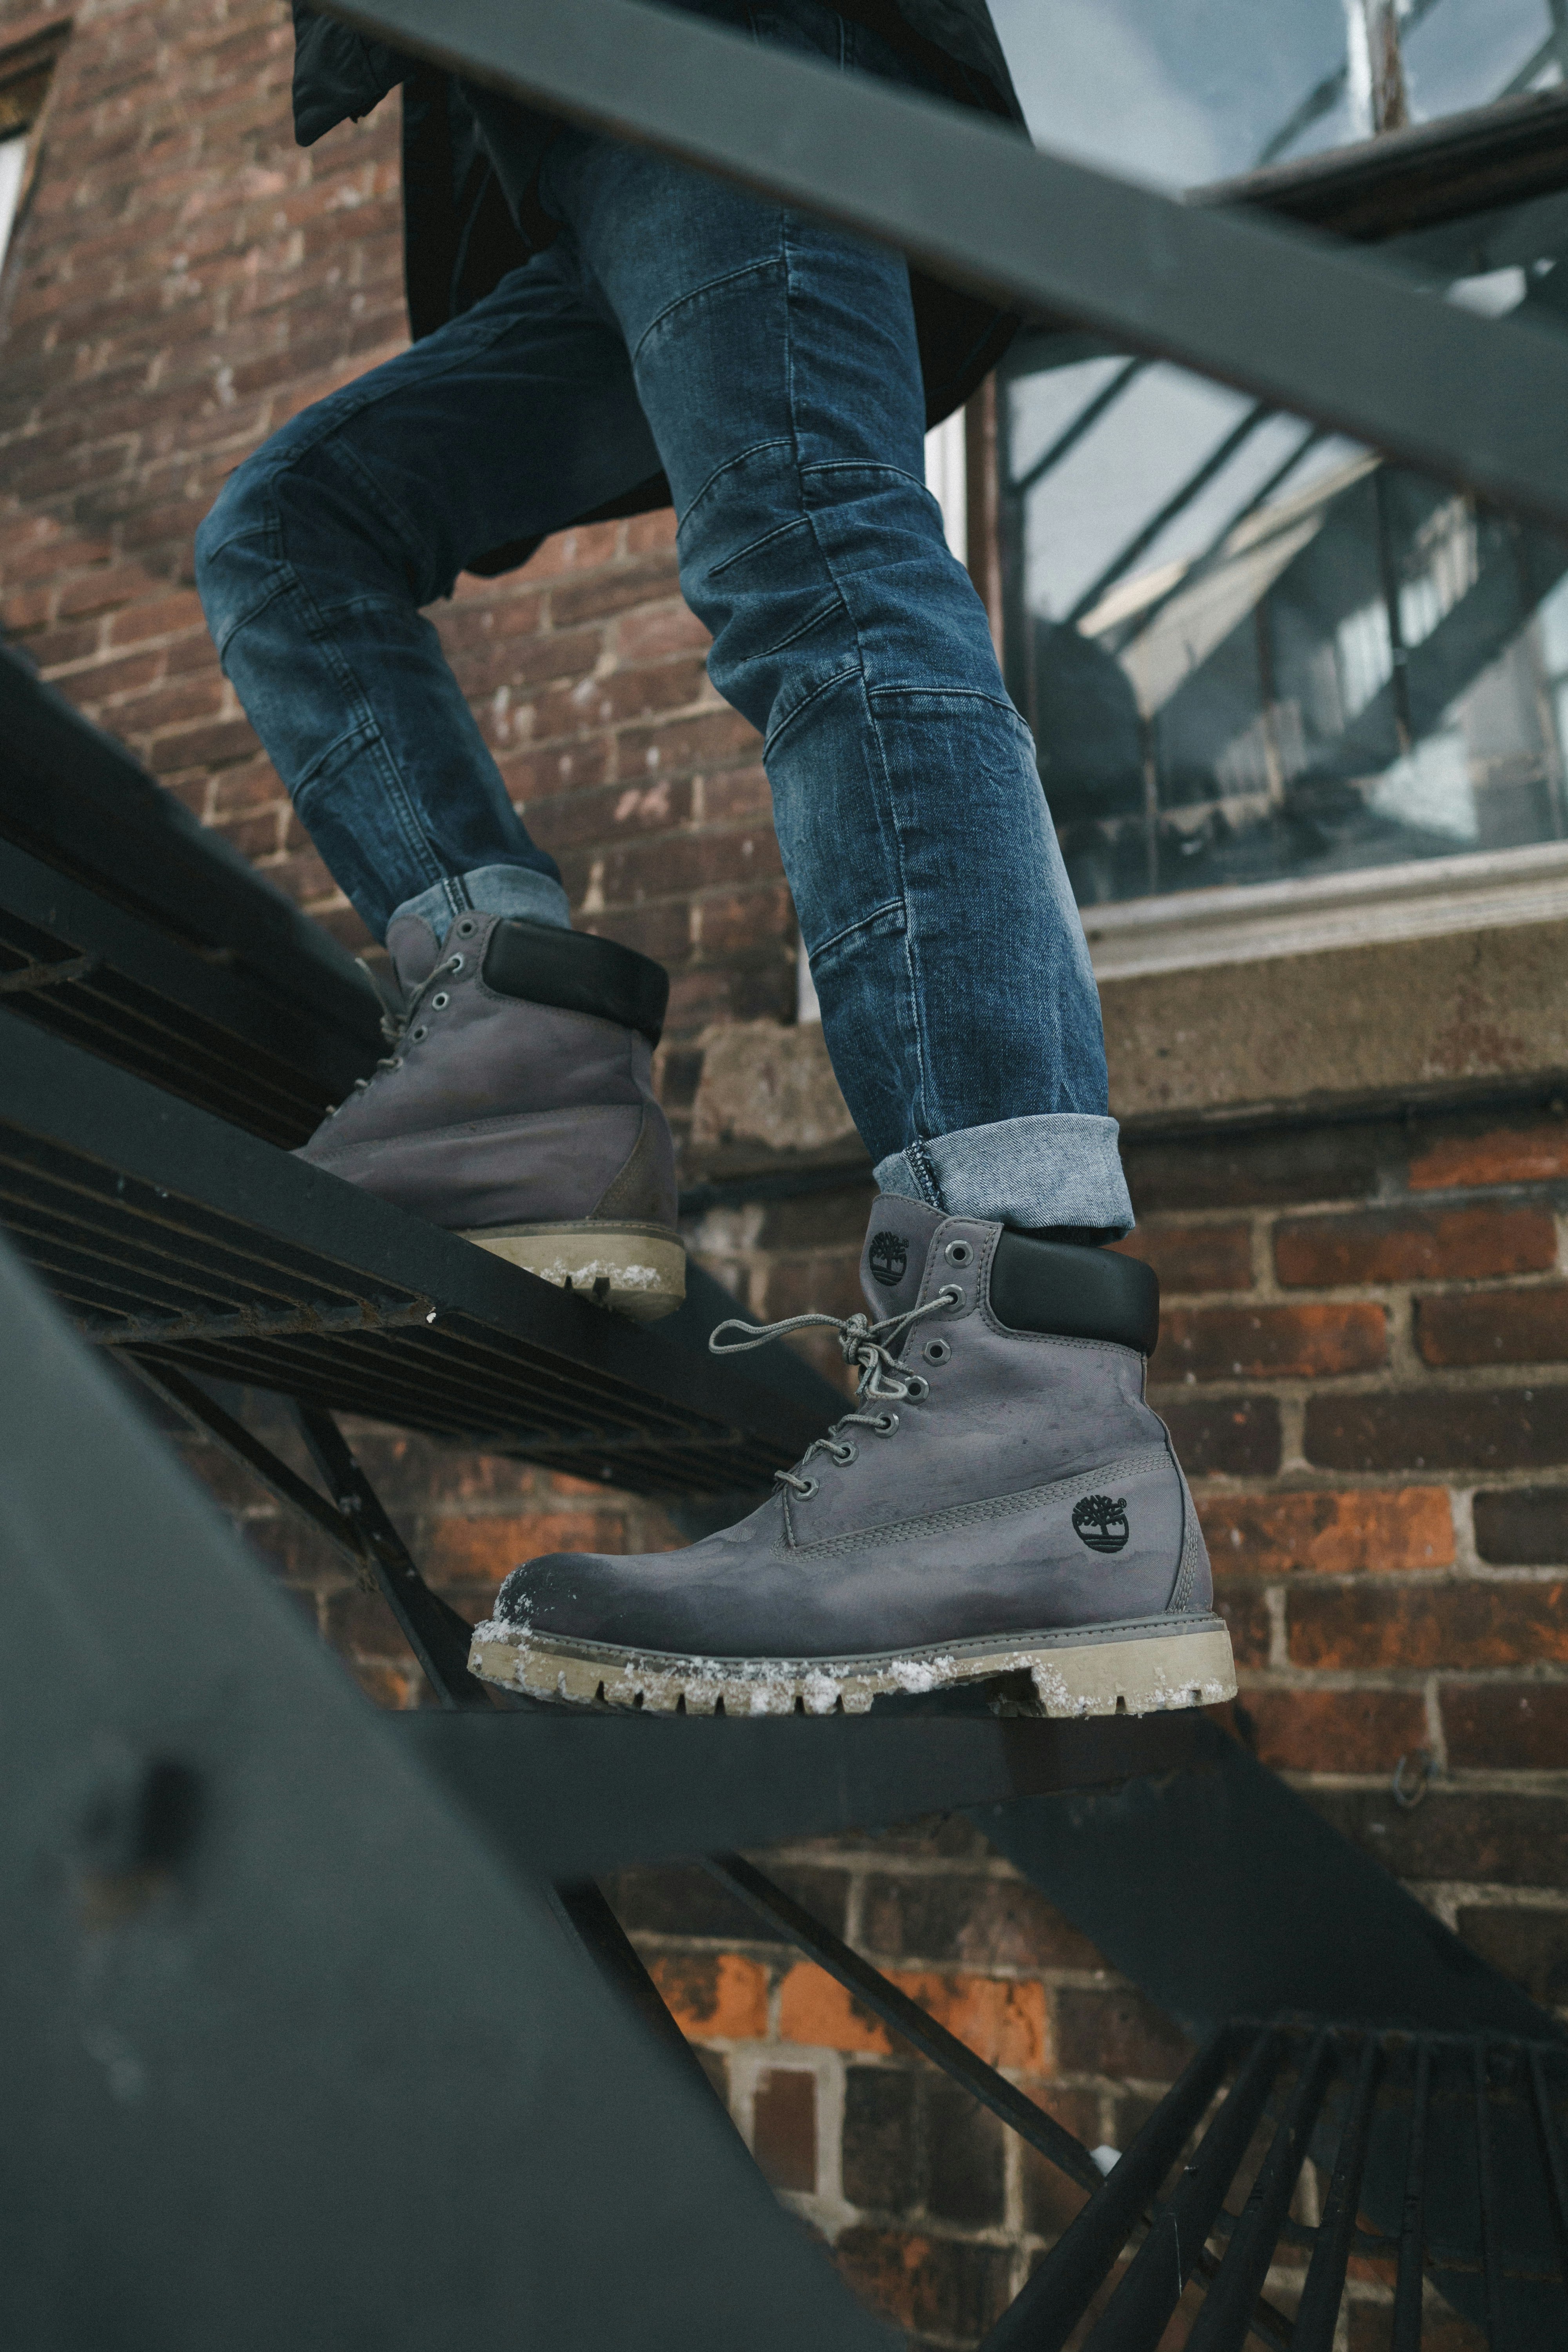 person wearing gray Timberland work boots climbing on black metal stairs